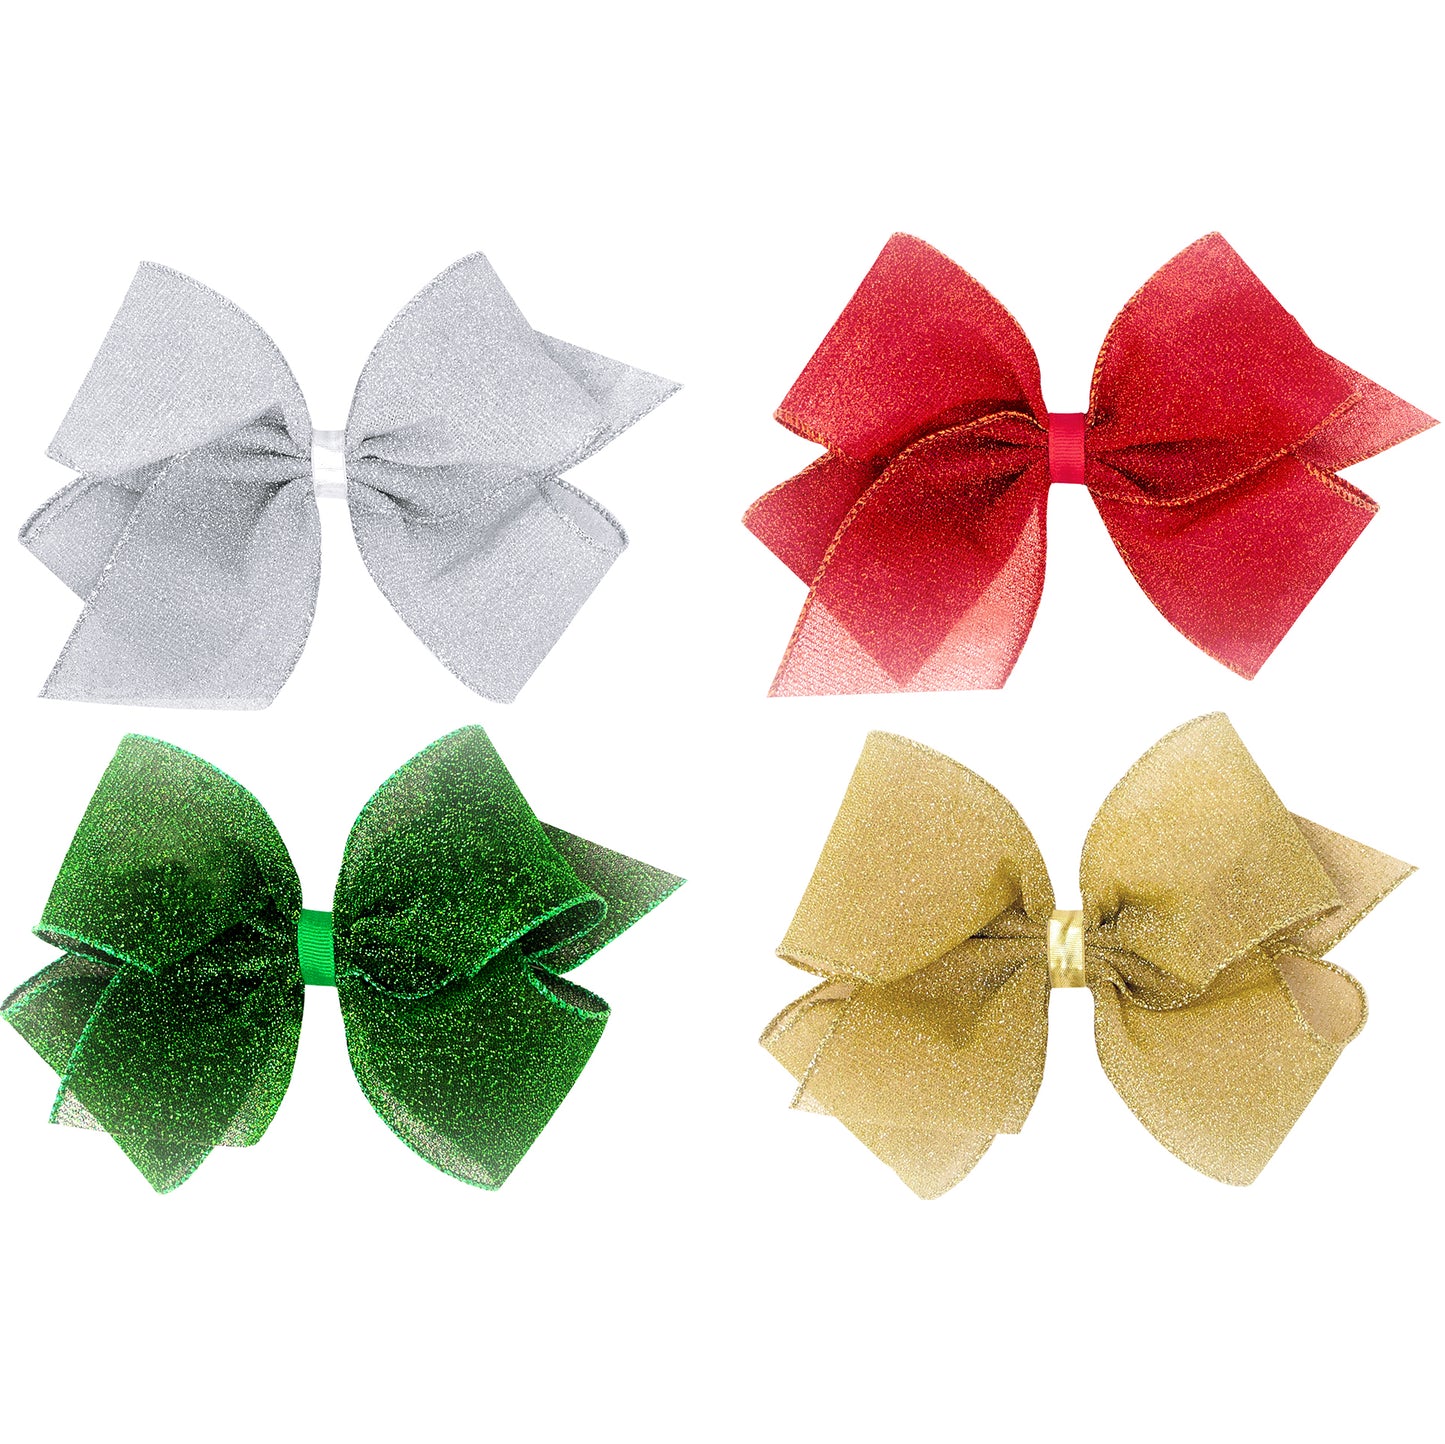 Wee Ones Extra-Small Sparkle Glimmer Bow (4 Colors)